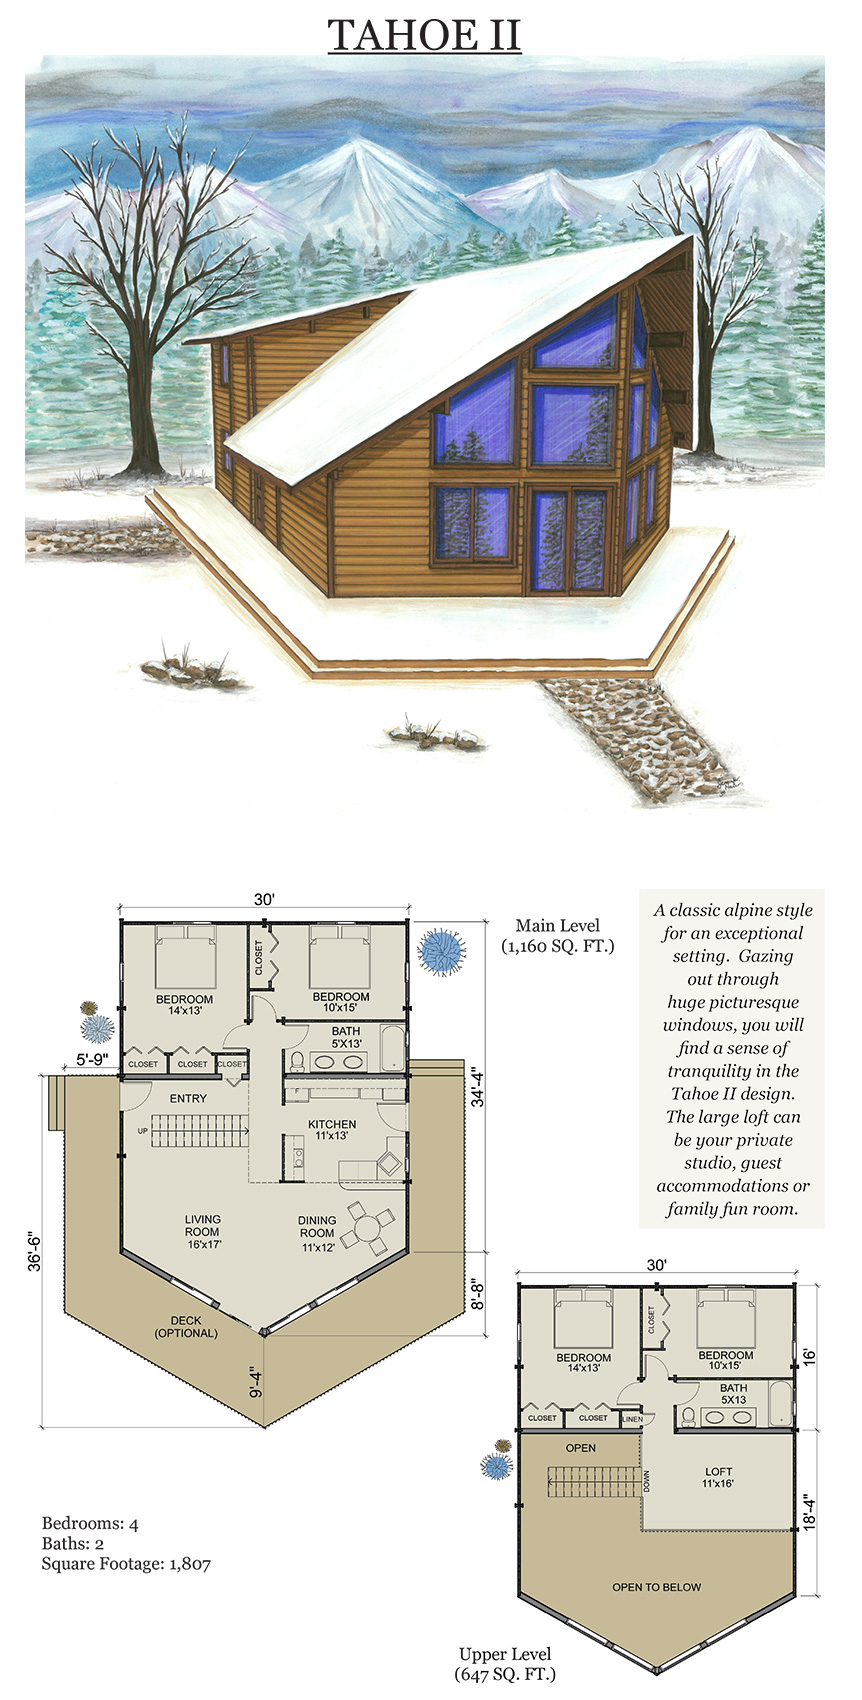 Click here to zoom floor plan view.